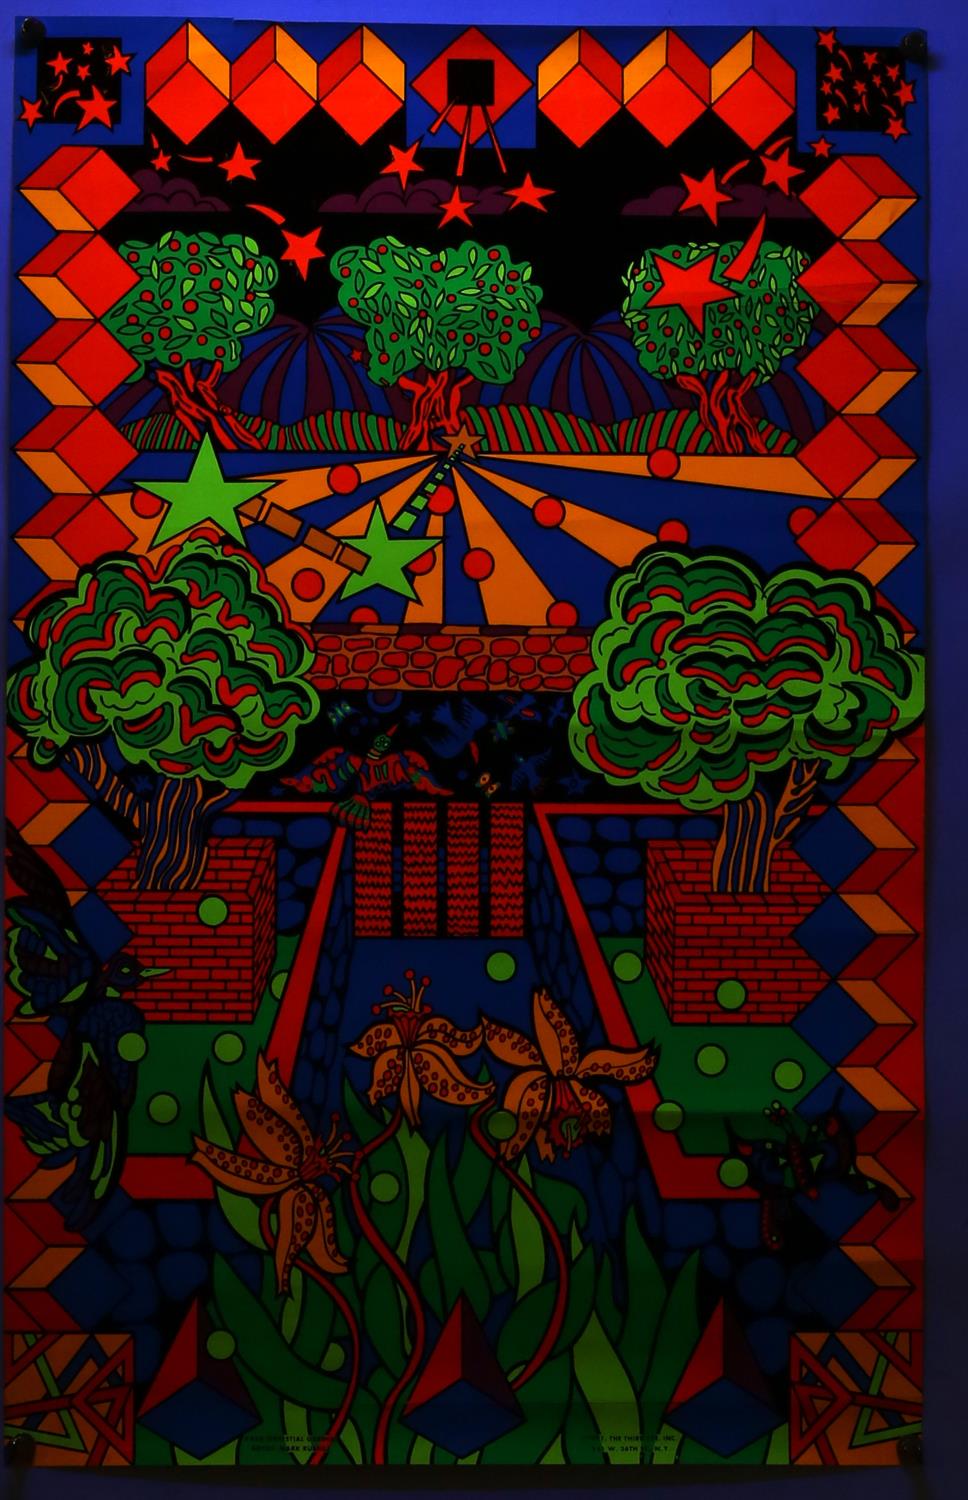 2 x 1971 Psychedelic blacklight posters including Terrestrial Garden, artwork by Mark Russell, - Image 2 of 4